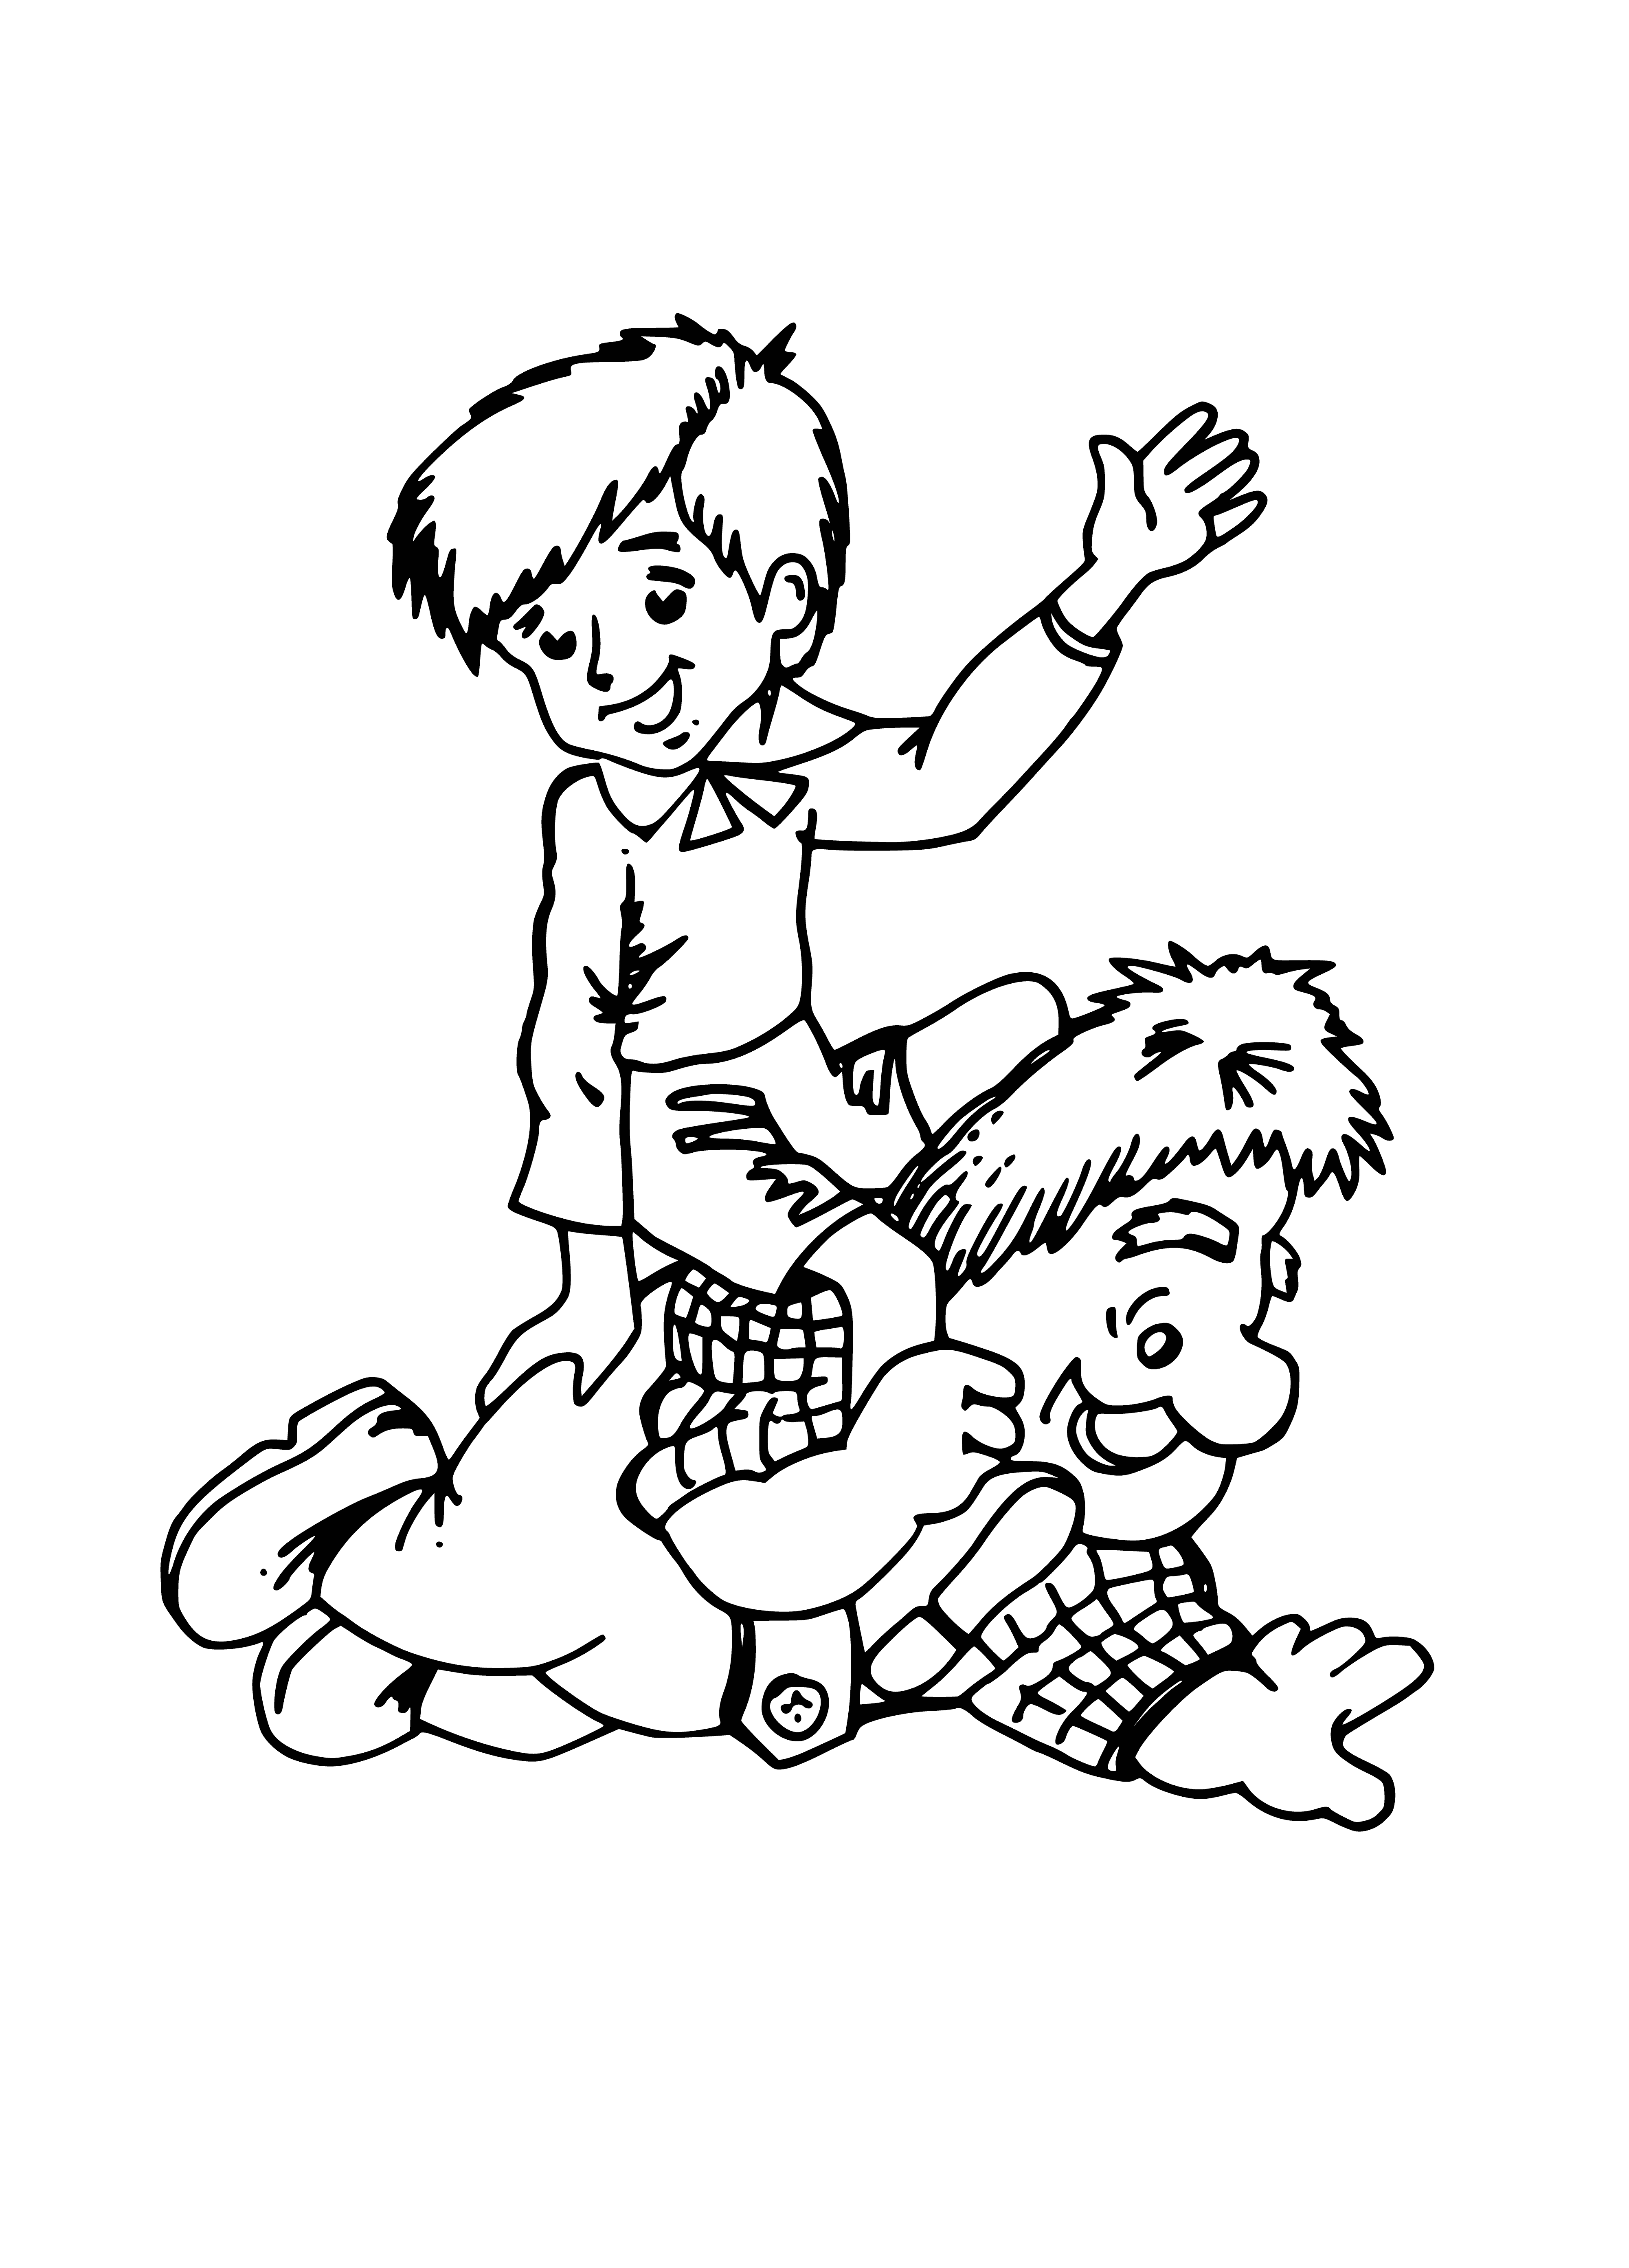 2 people in coloring page: child & adult in front of building, looking at each other.